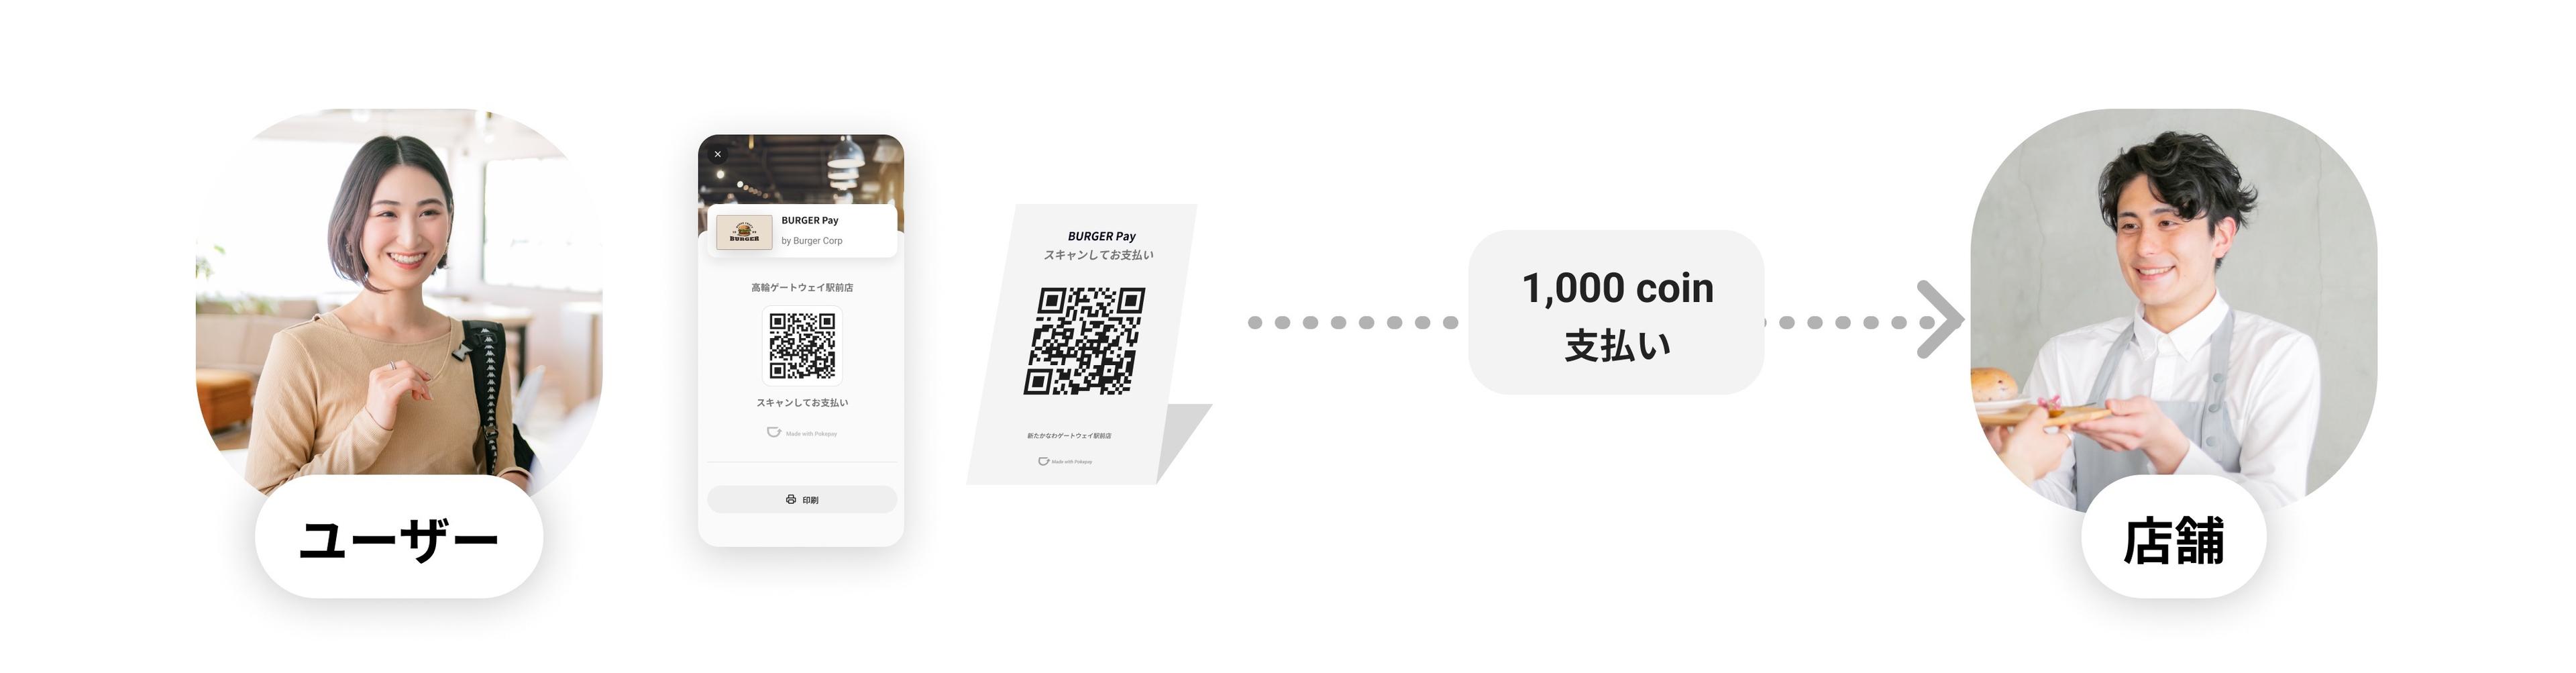 The desktop image of payment with QR code for Japanese